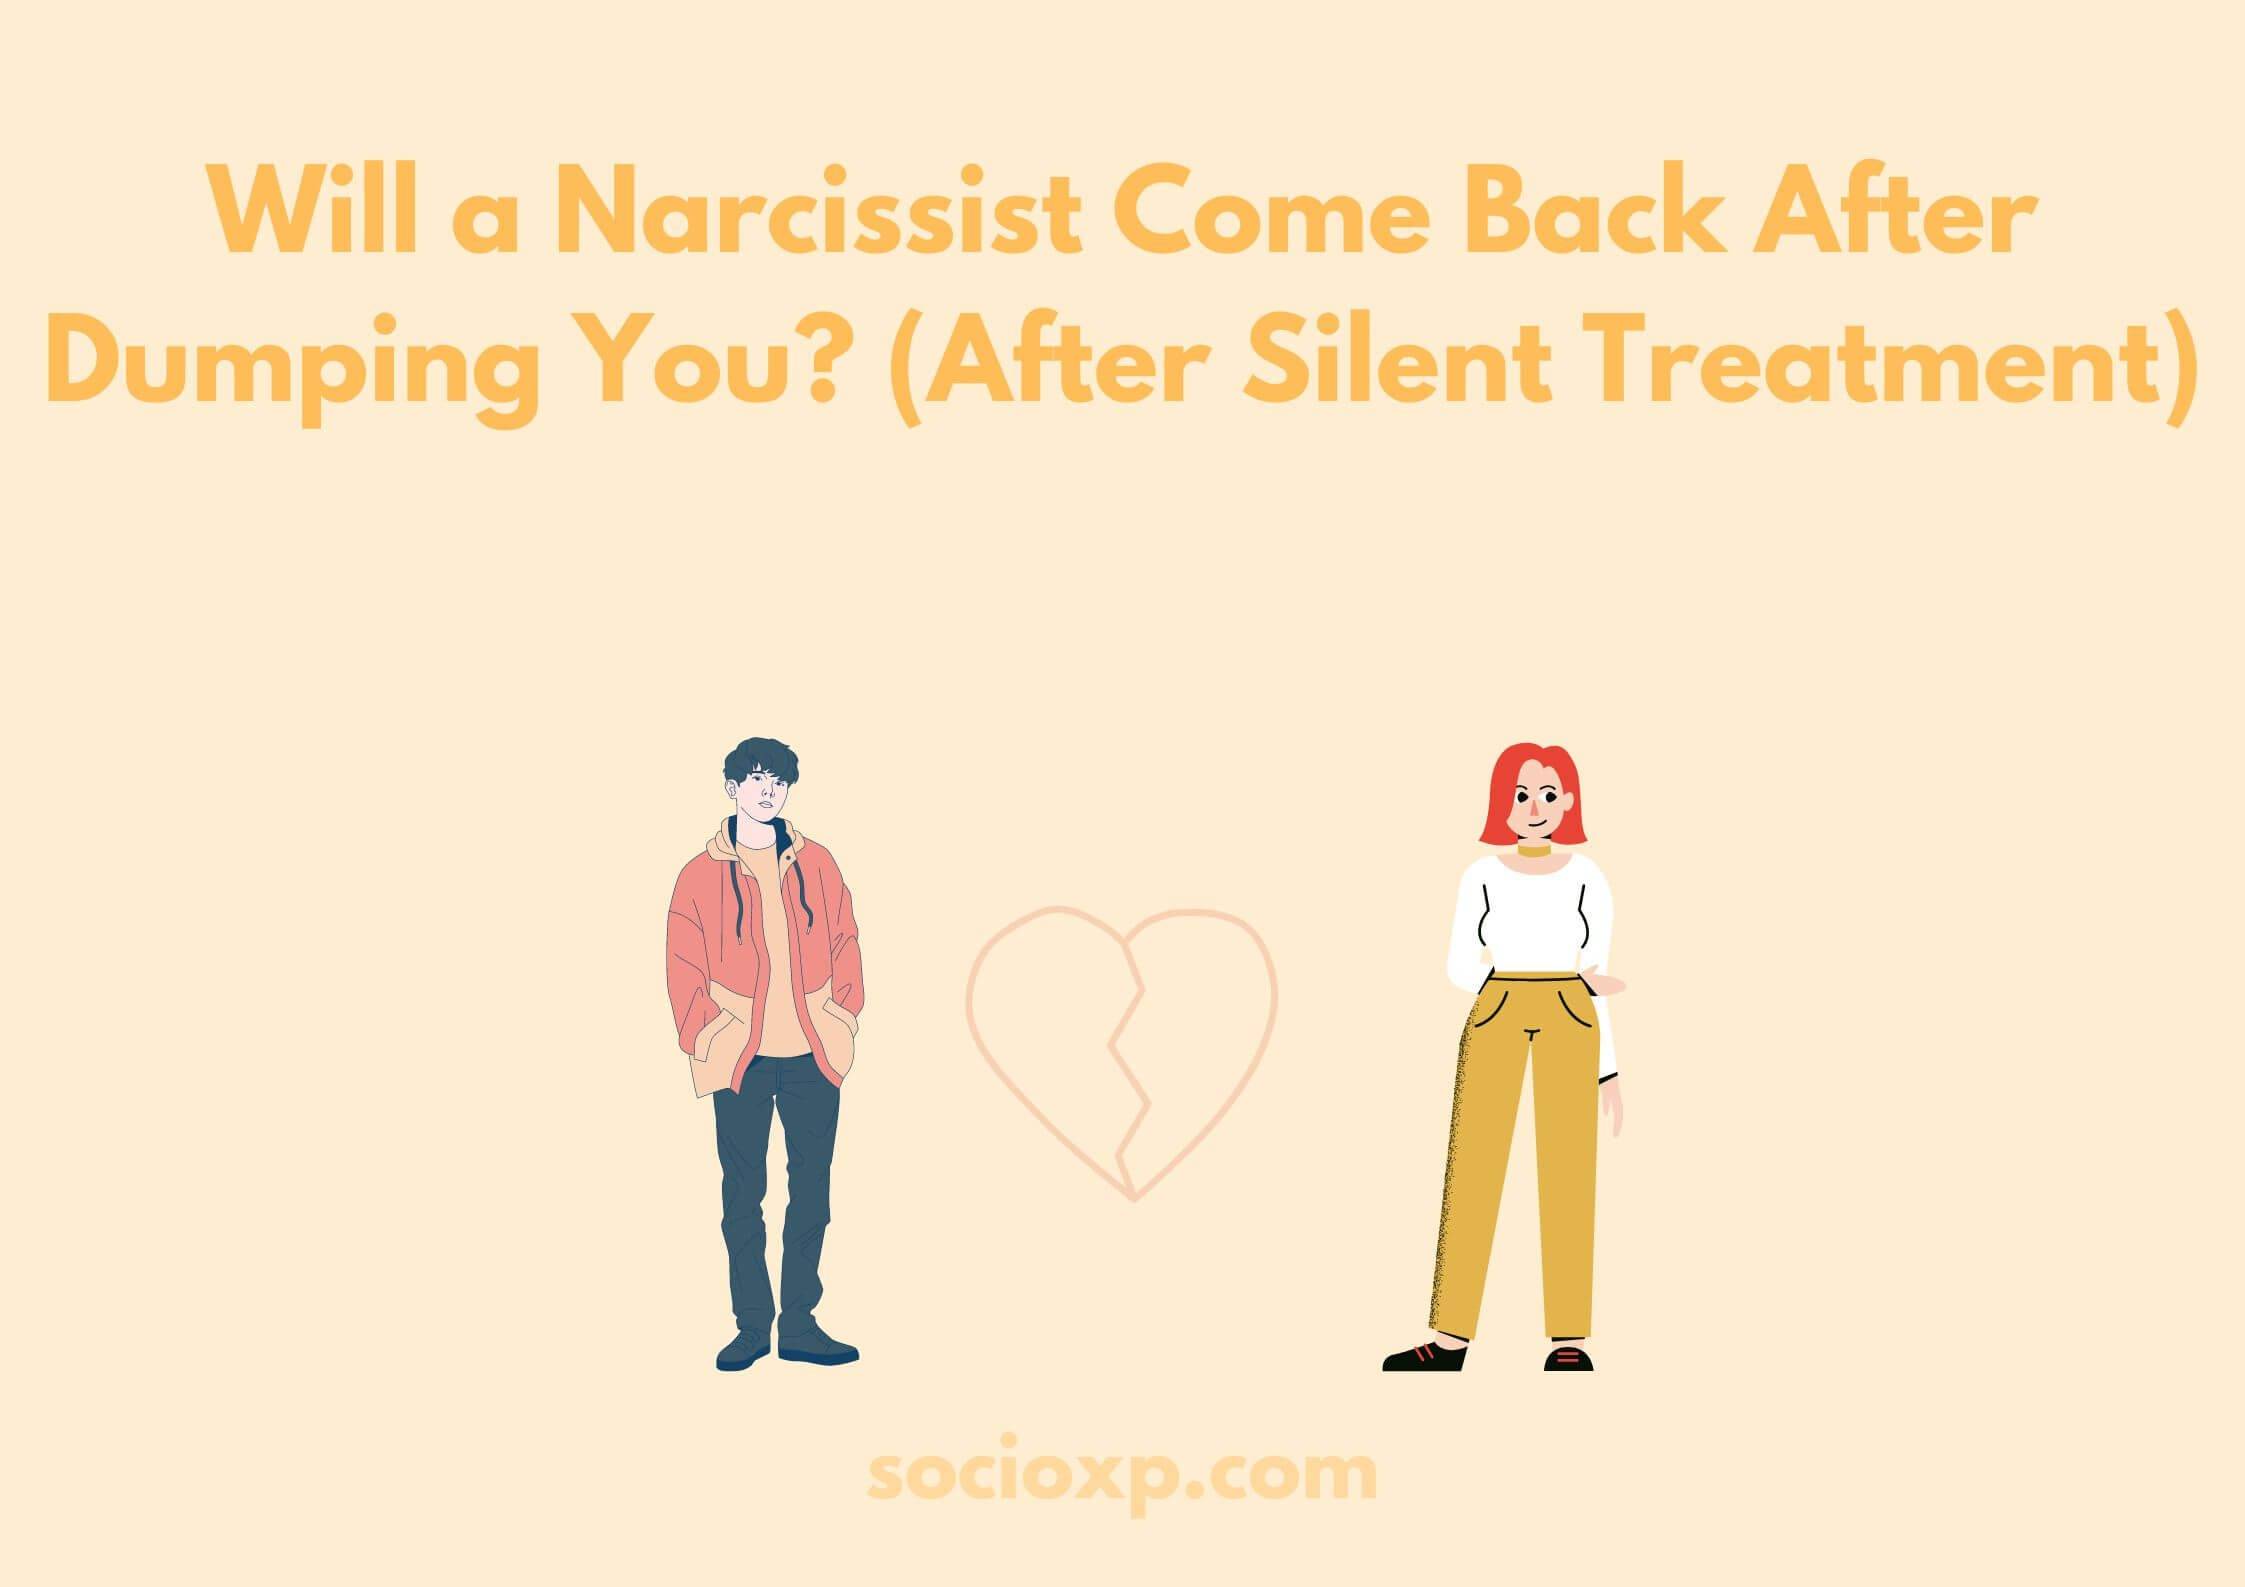 Will a Narcissist Come Back After Dumping You? (After Silent Treatment)